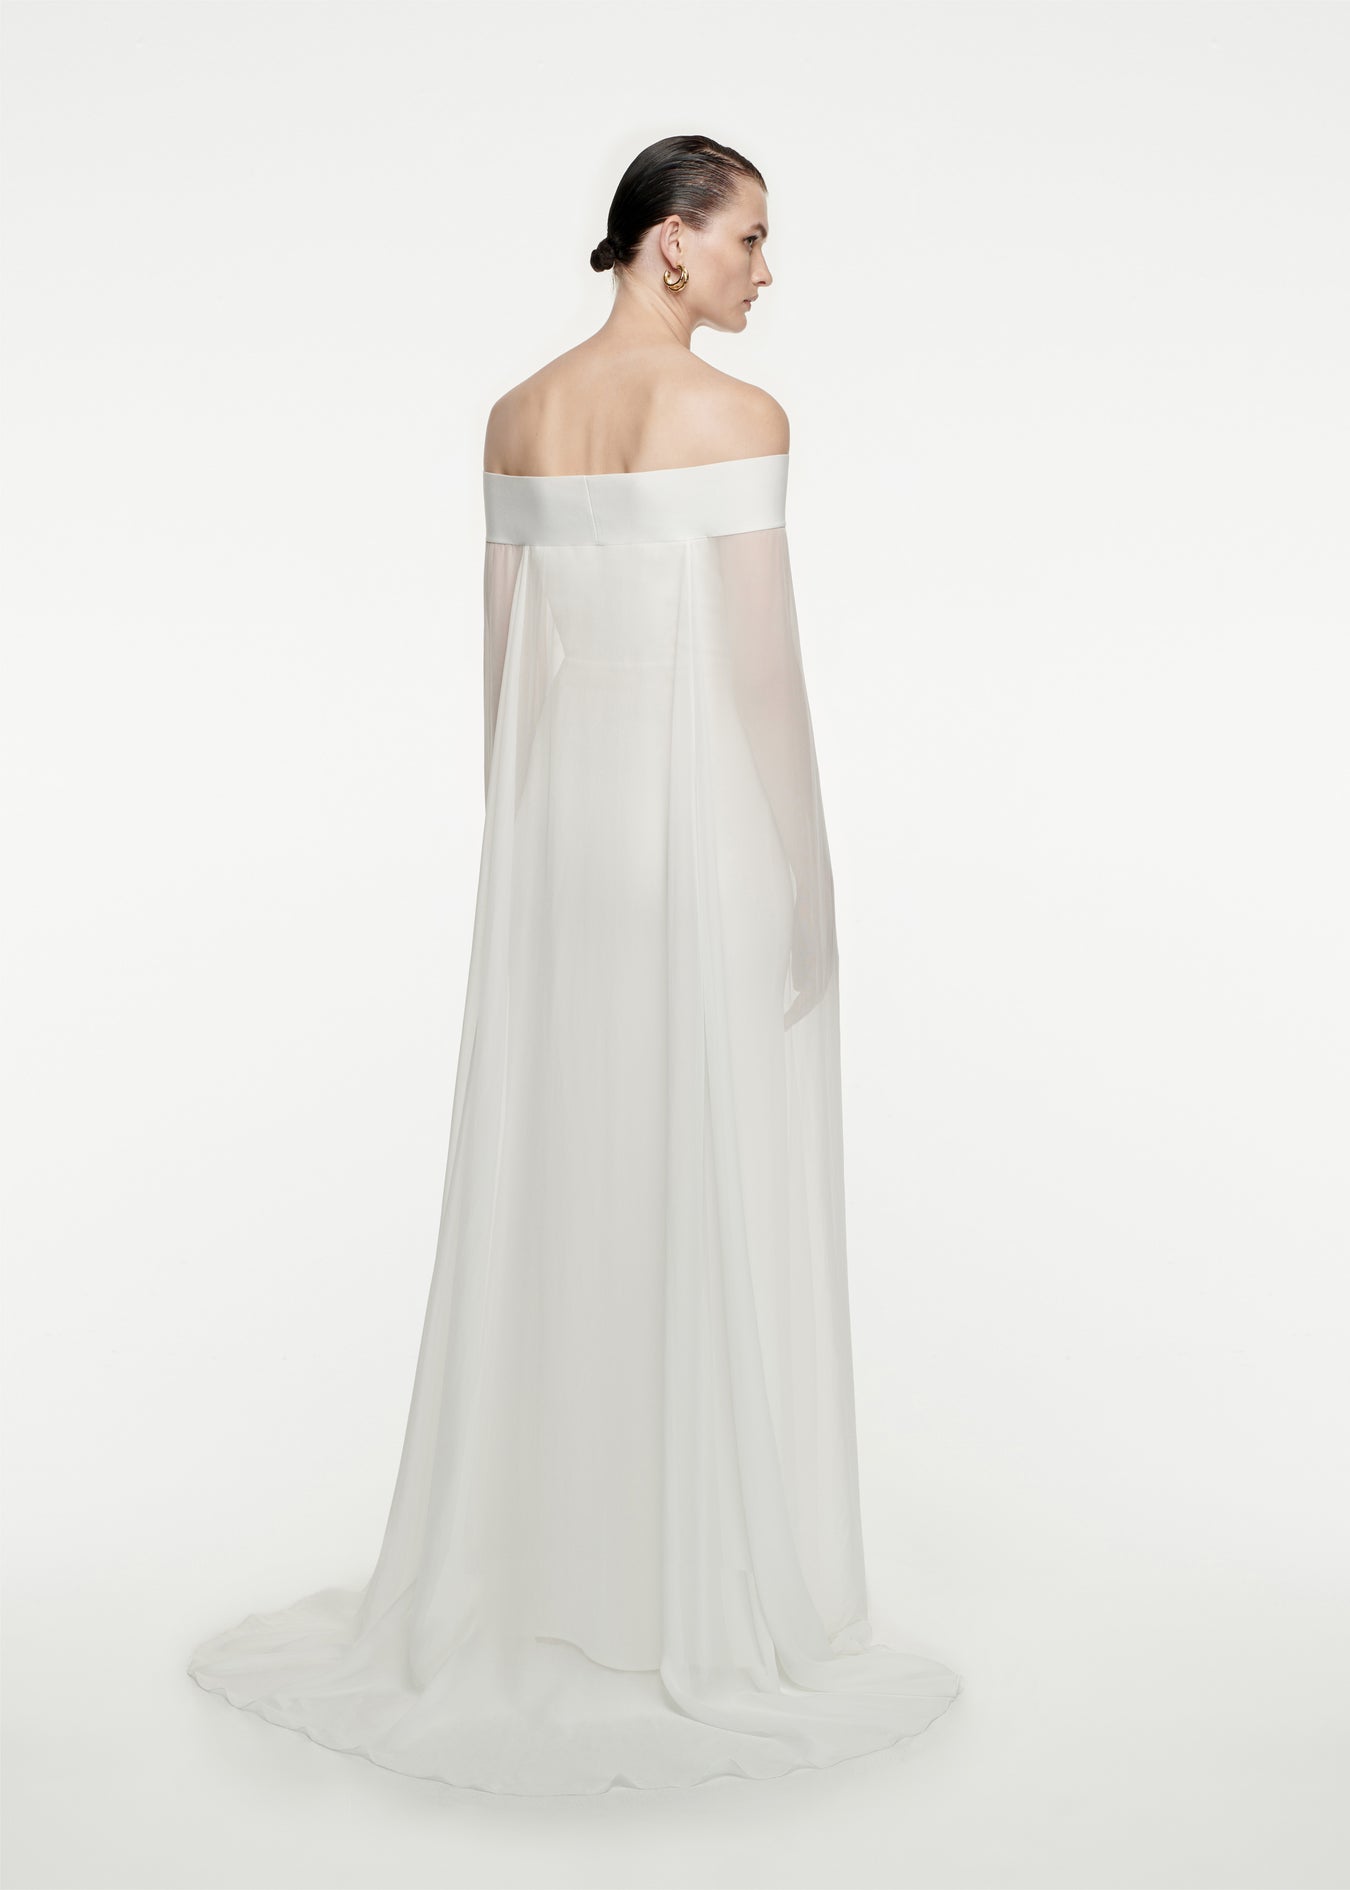 The back of a woman wearing the Off The Shoulder Stretch-Cady Gown in White